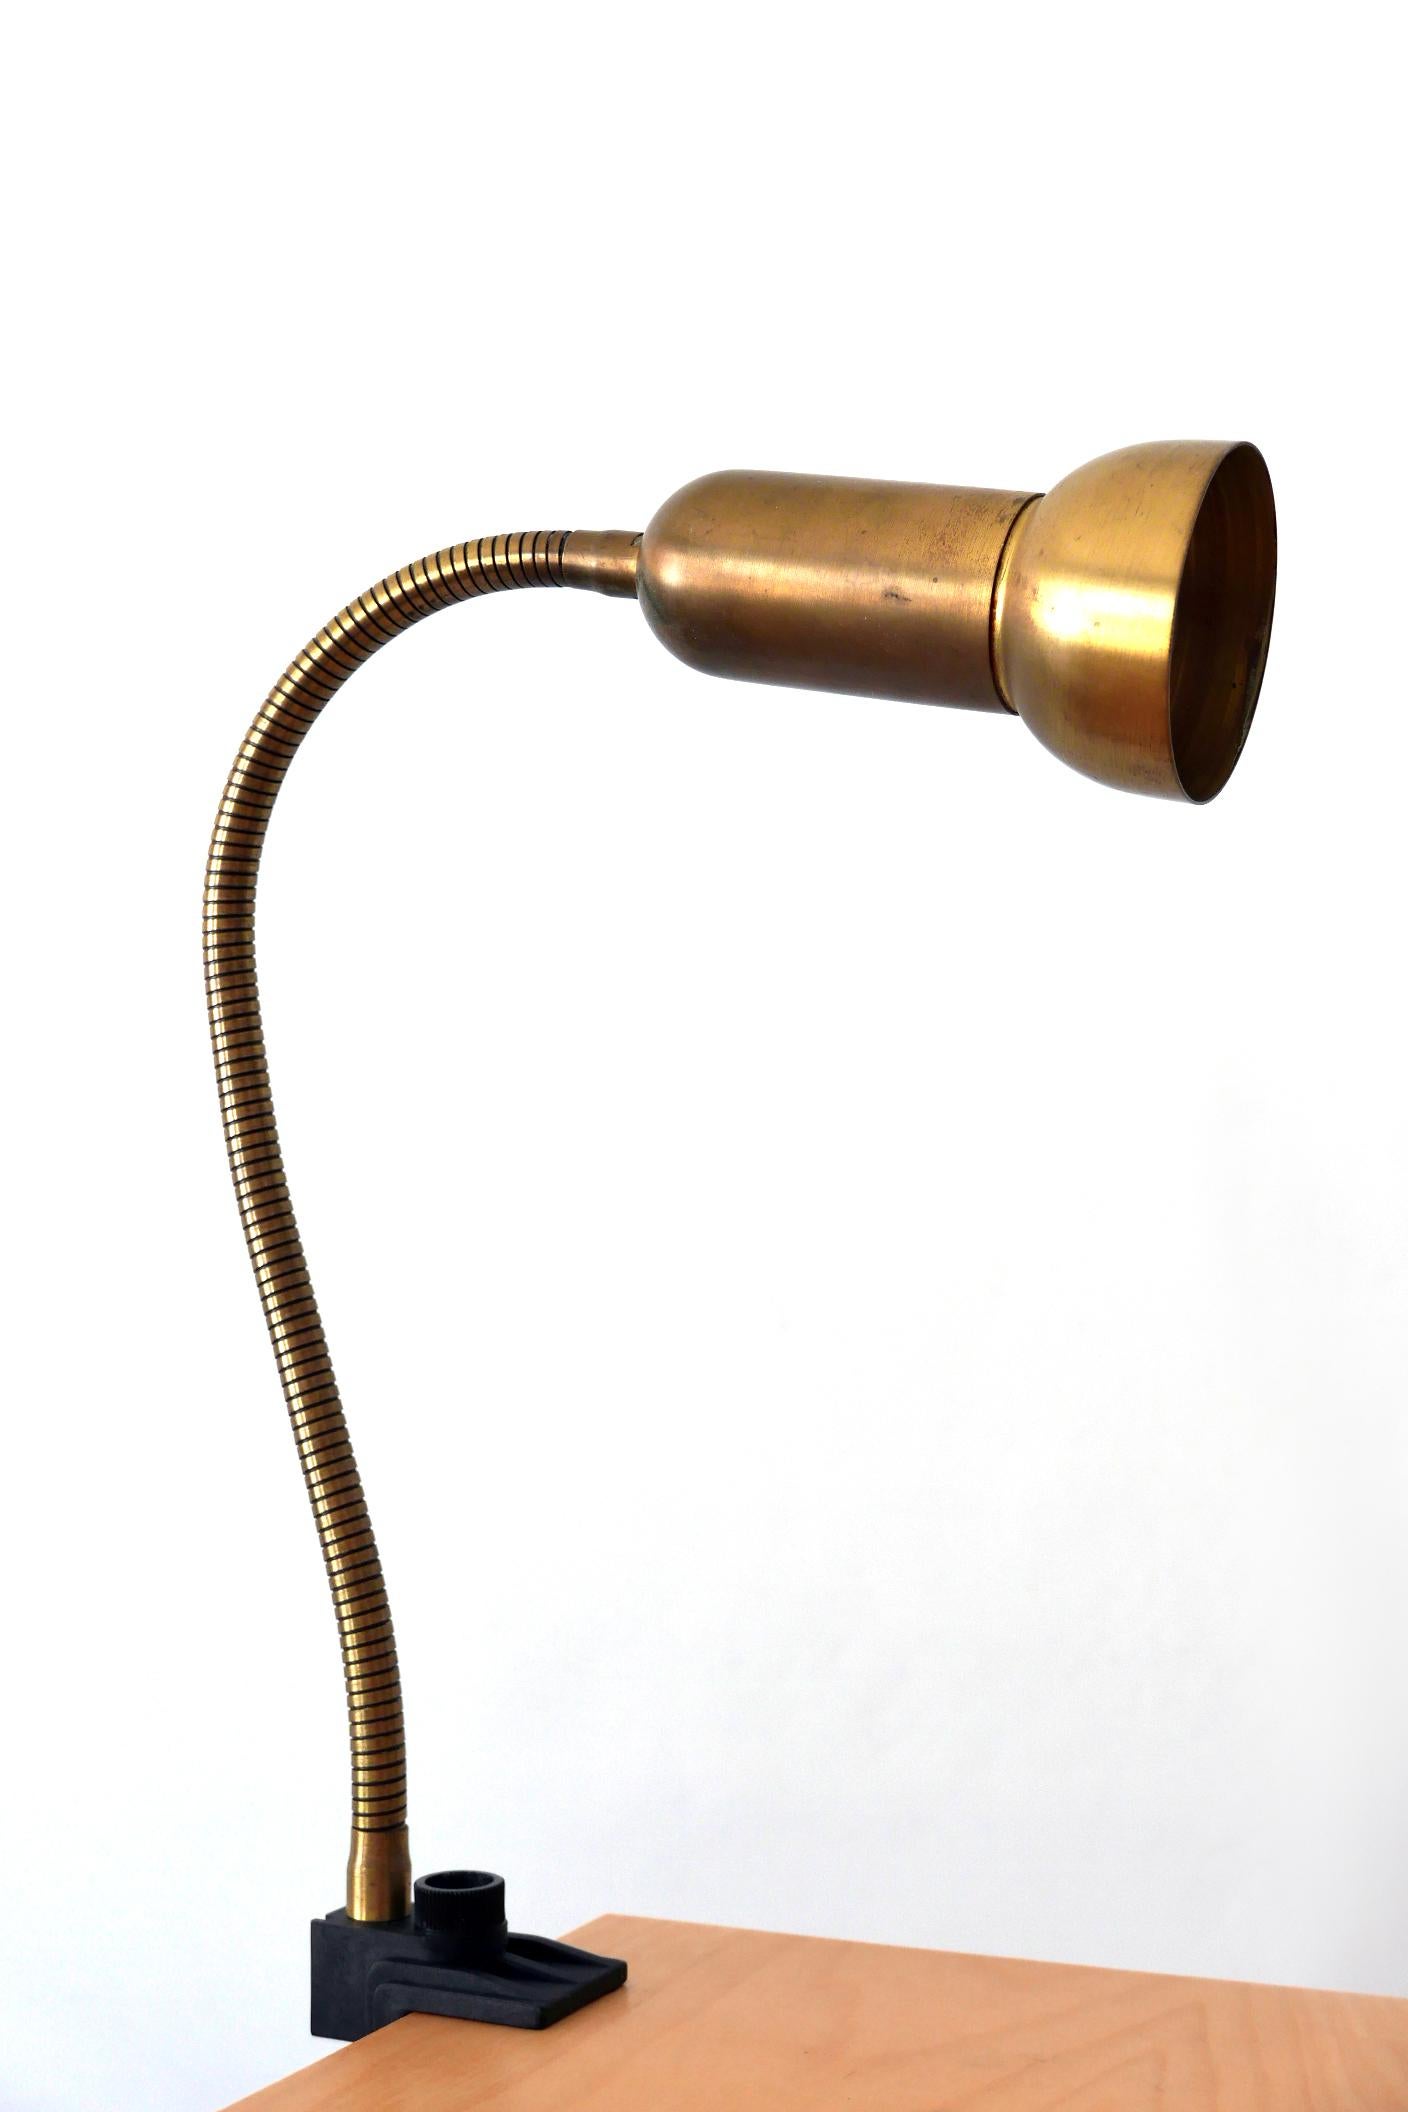 Lovely Mid-Century Modern brass clamp table lamp. Manufactured by Gebrüder Cosack, 1970s, Germany.

Due to the goose neck, the lamp is adjustable in various positions.

Executed in brass, the lamp needs 1 x E27 / E26 Edison screw fit bulb, is wired